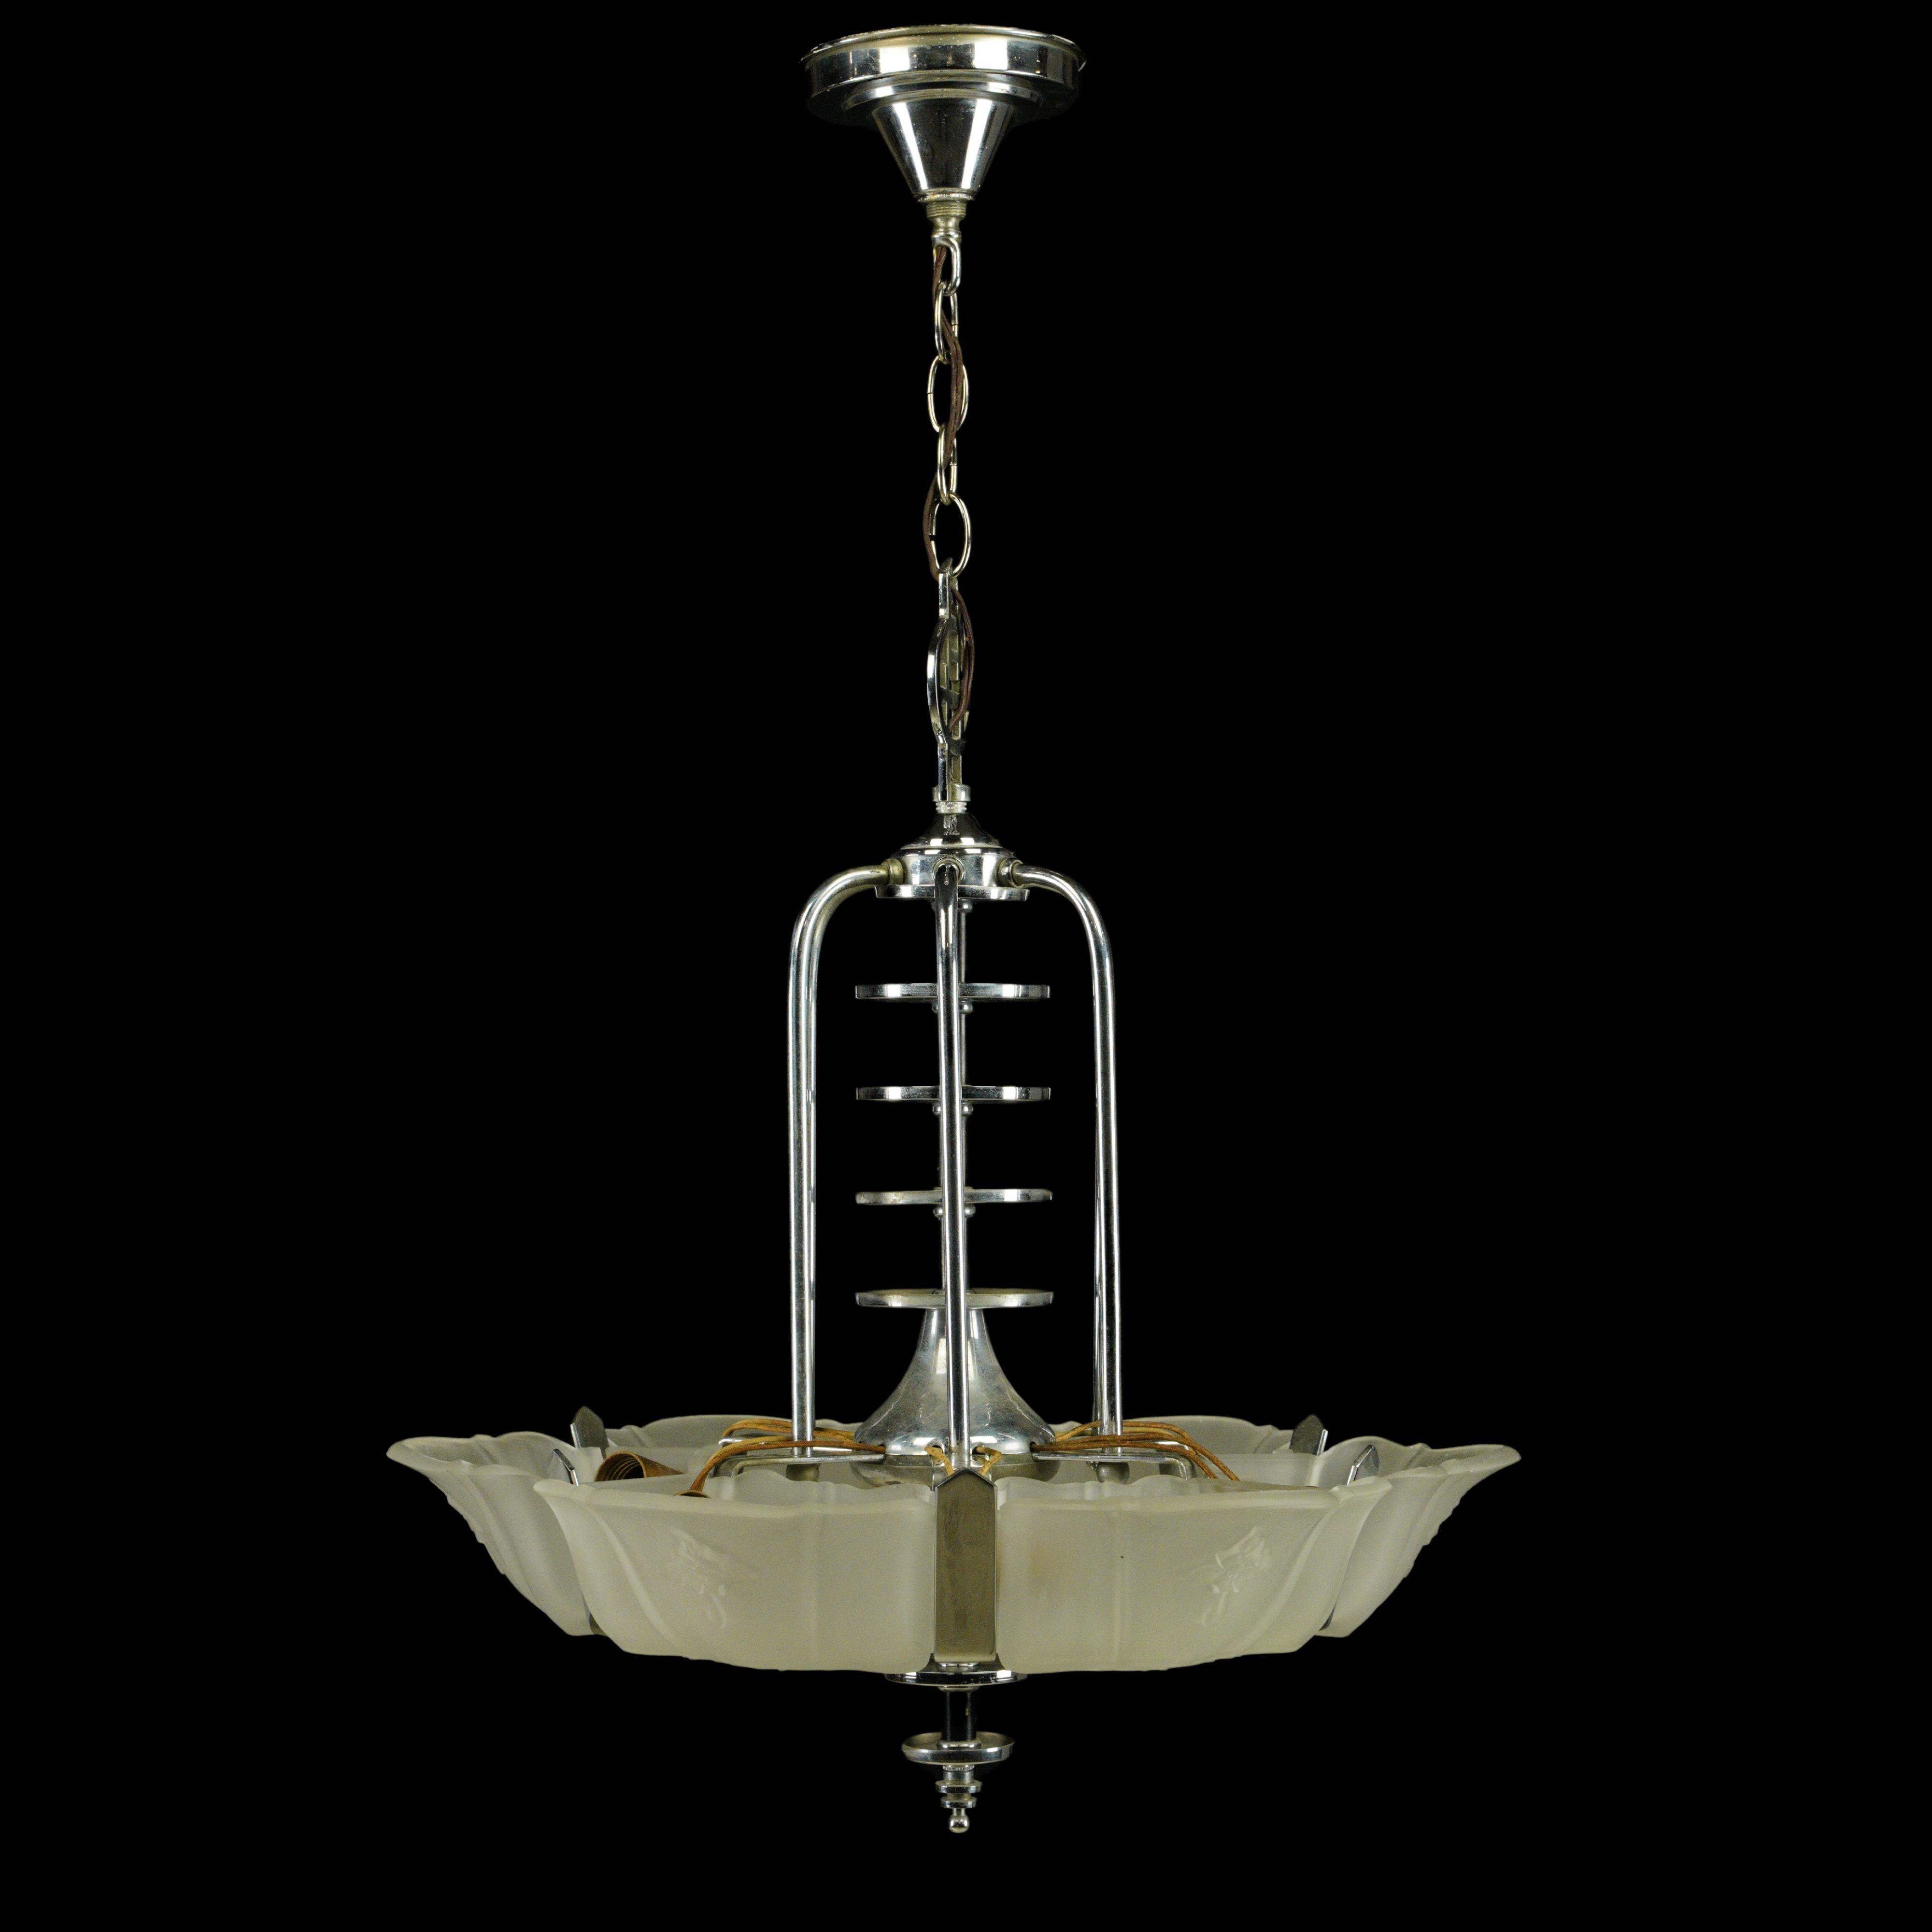 Art Deco steel hardware chandelier with six translucent glass slip shades. This requires six standard medium base bulbs. Good condition with appropriate wear from age, with minor scratches. One available. Cleaned and restored. Please note, this item